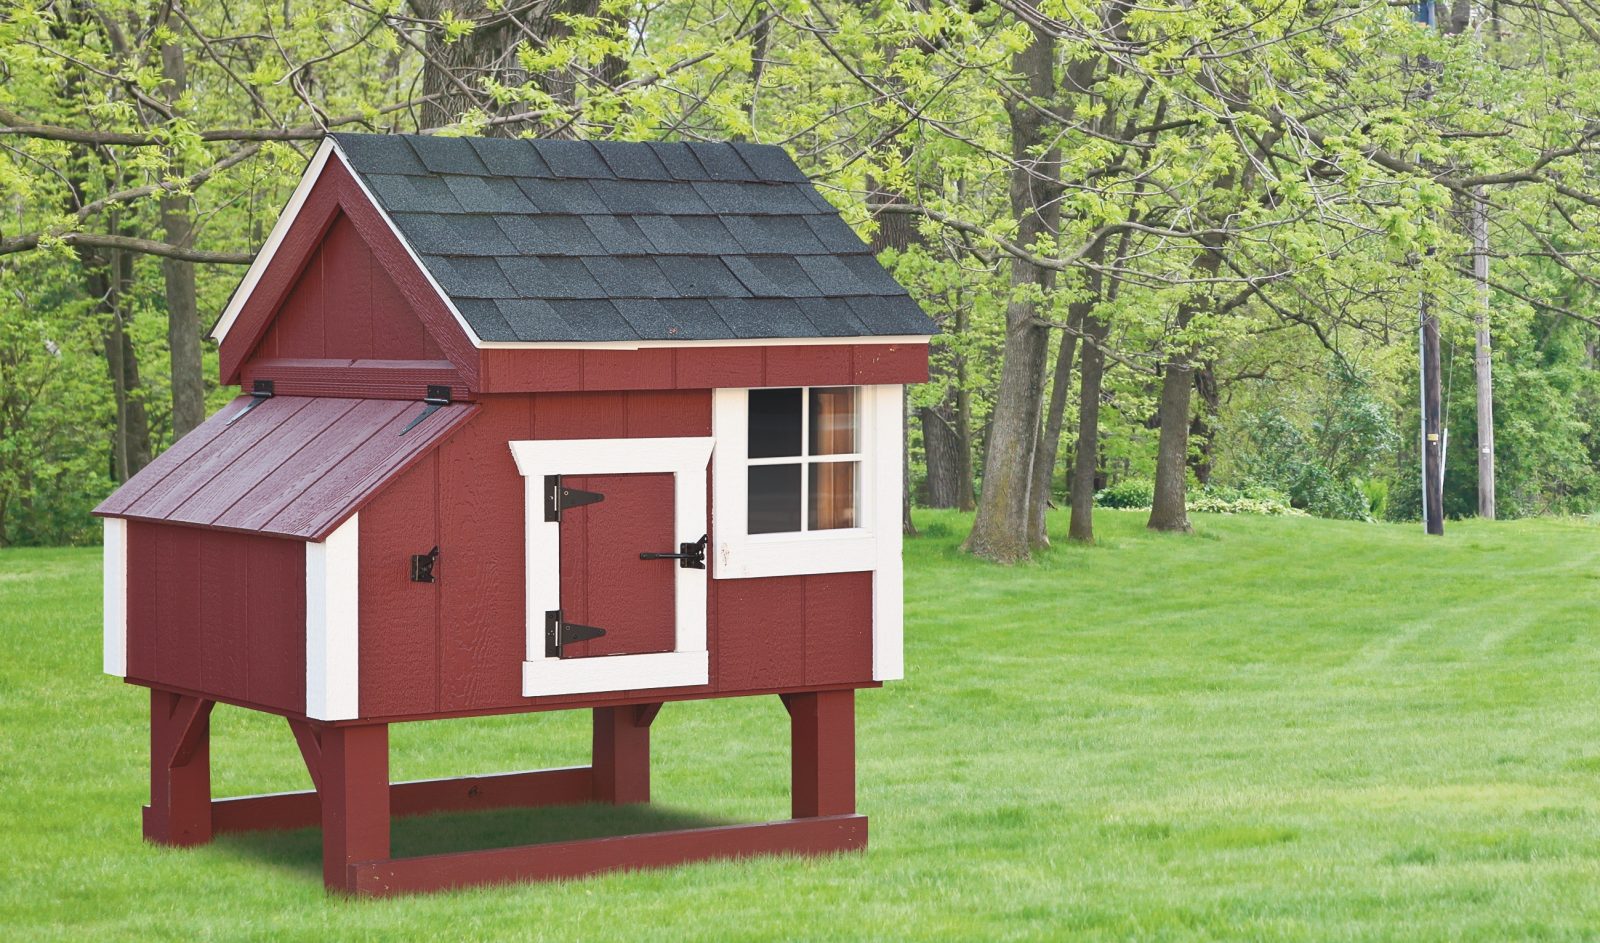 a frame chicken coop 3x3 A Frame With Duratemp® siding 1600x1600 1